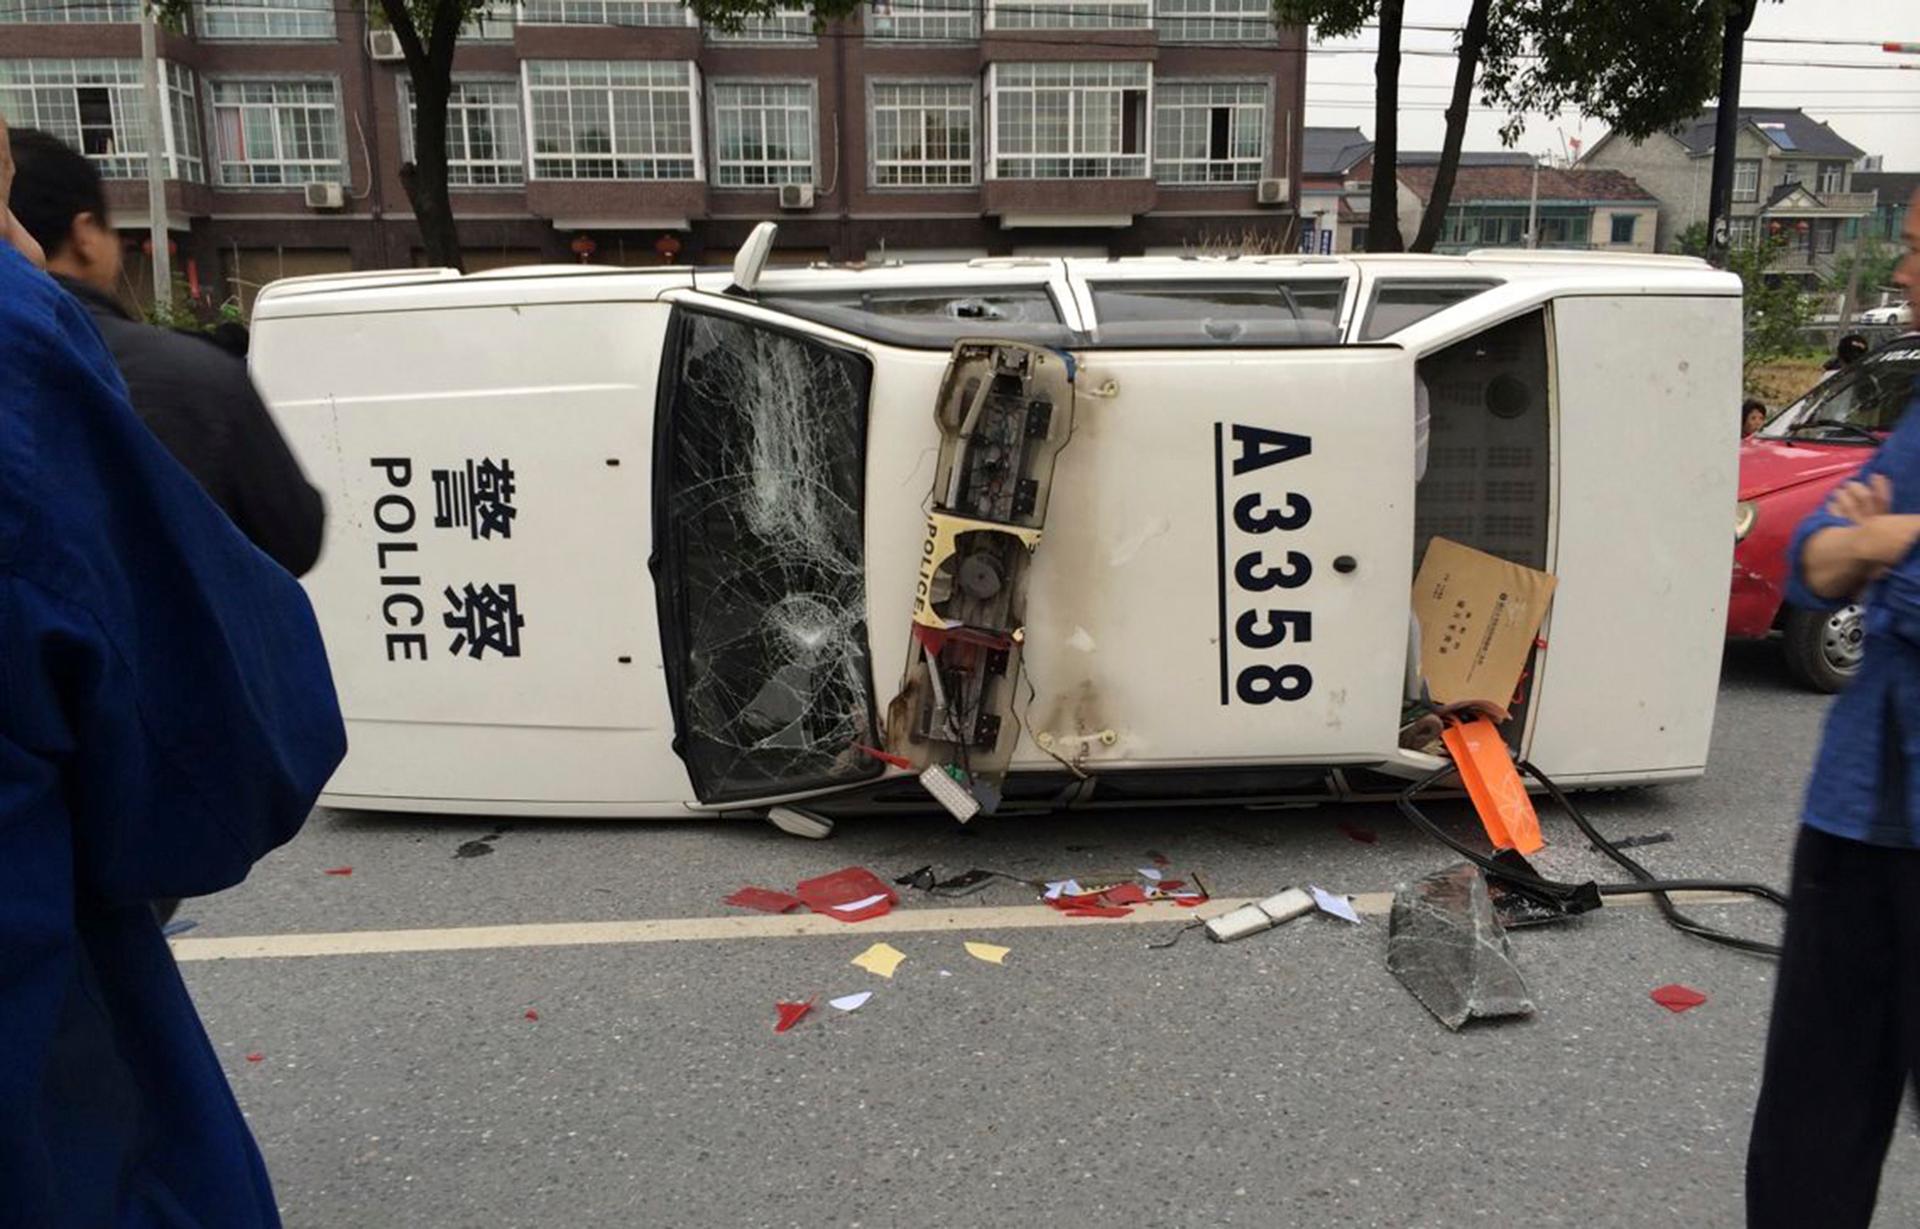 A police car is seen smashed and overturned as demonstrators protest against the construction of a waste incinerator in Hangzhou, China.